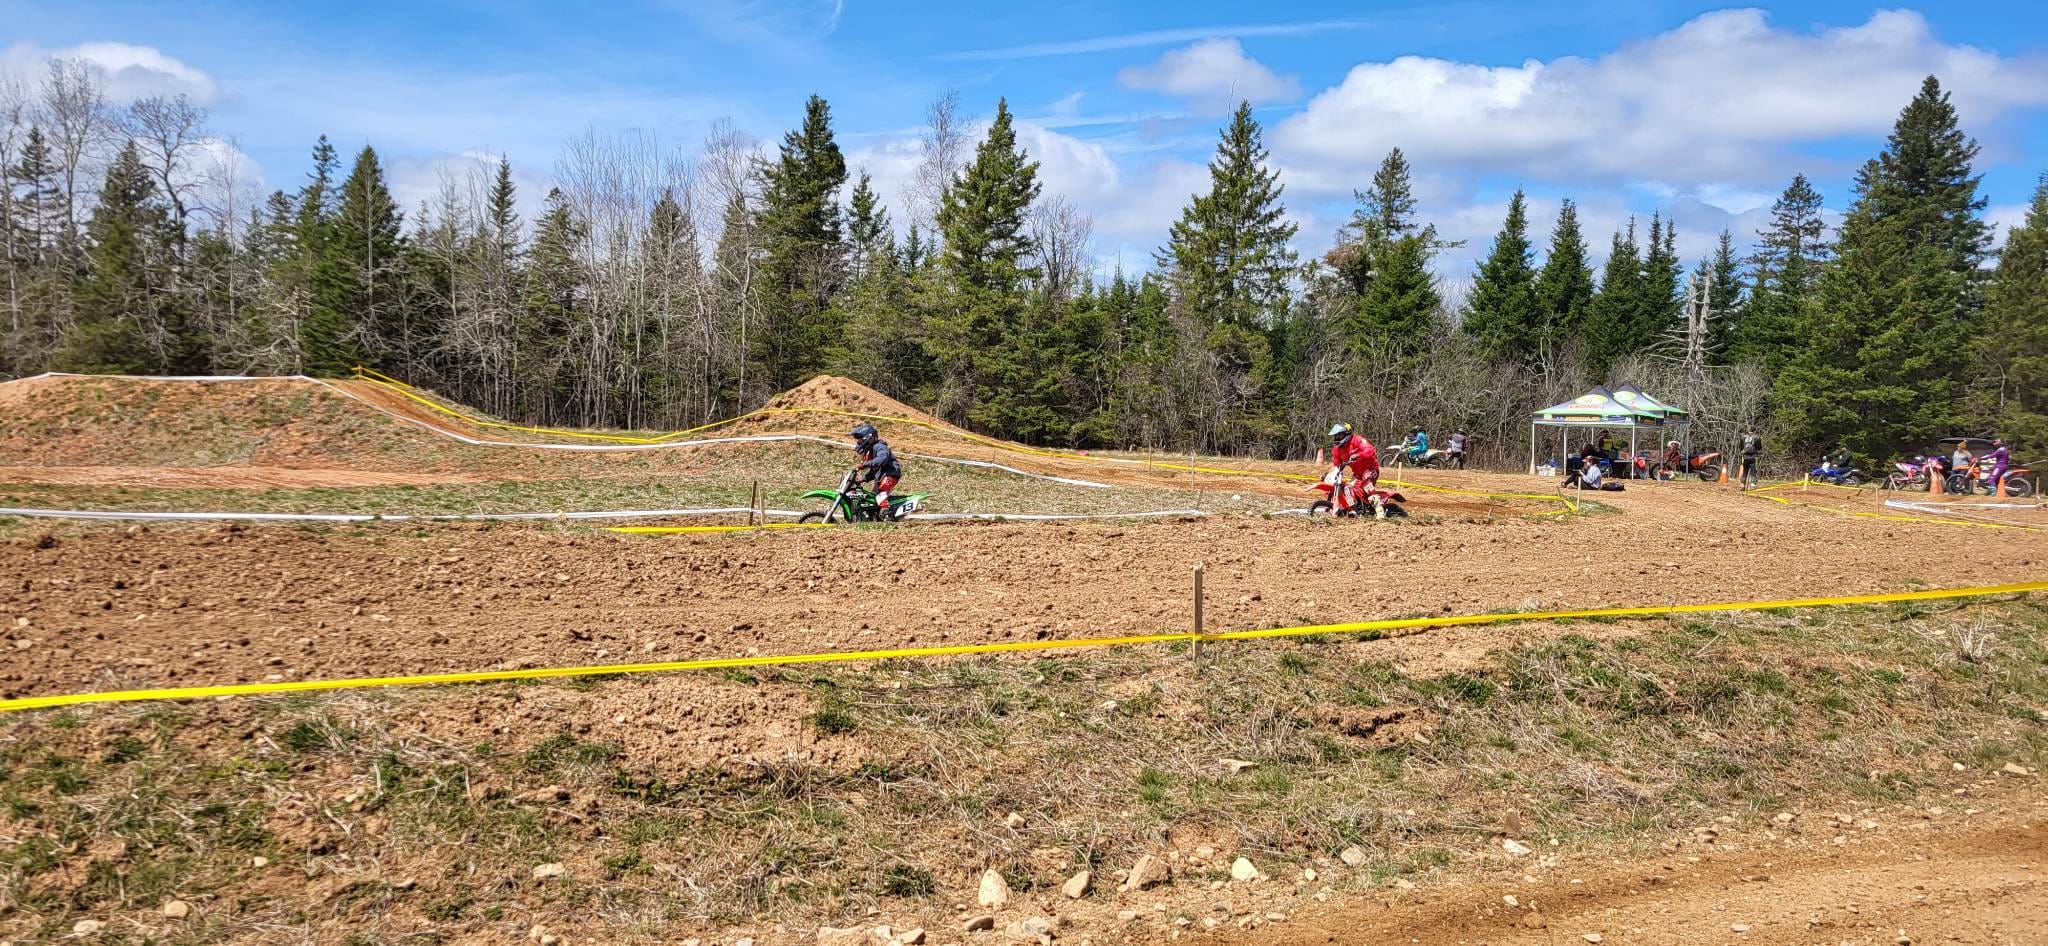 Racers complete a field loop during the sprint enduro